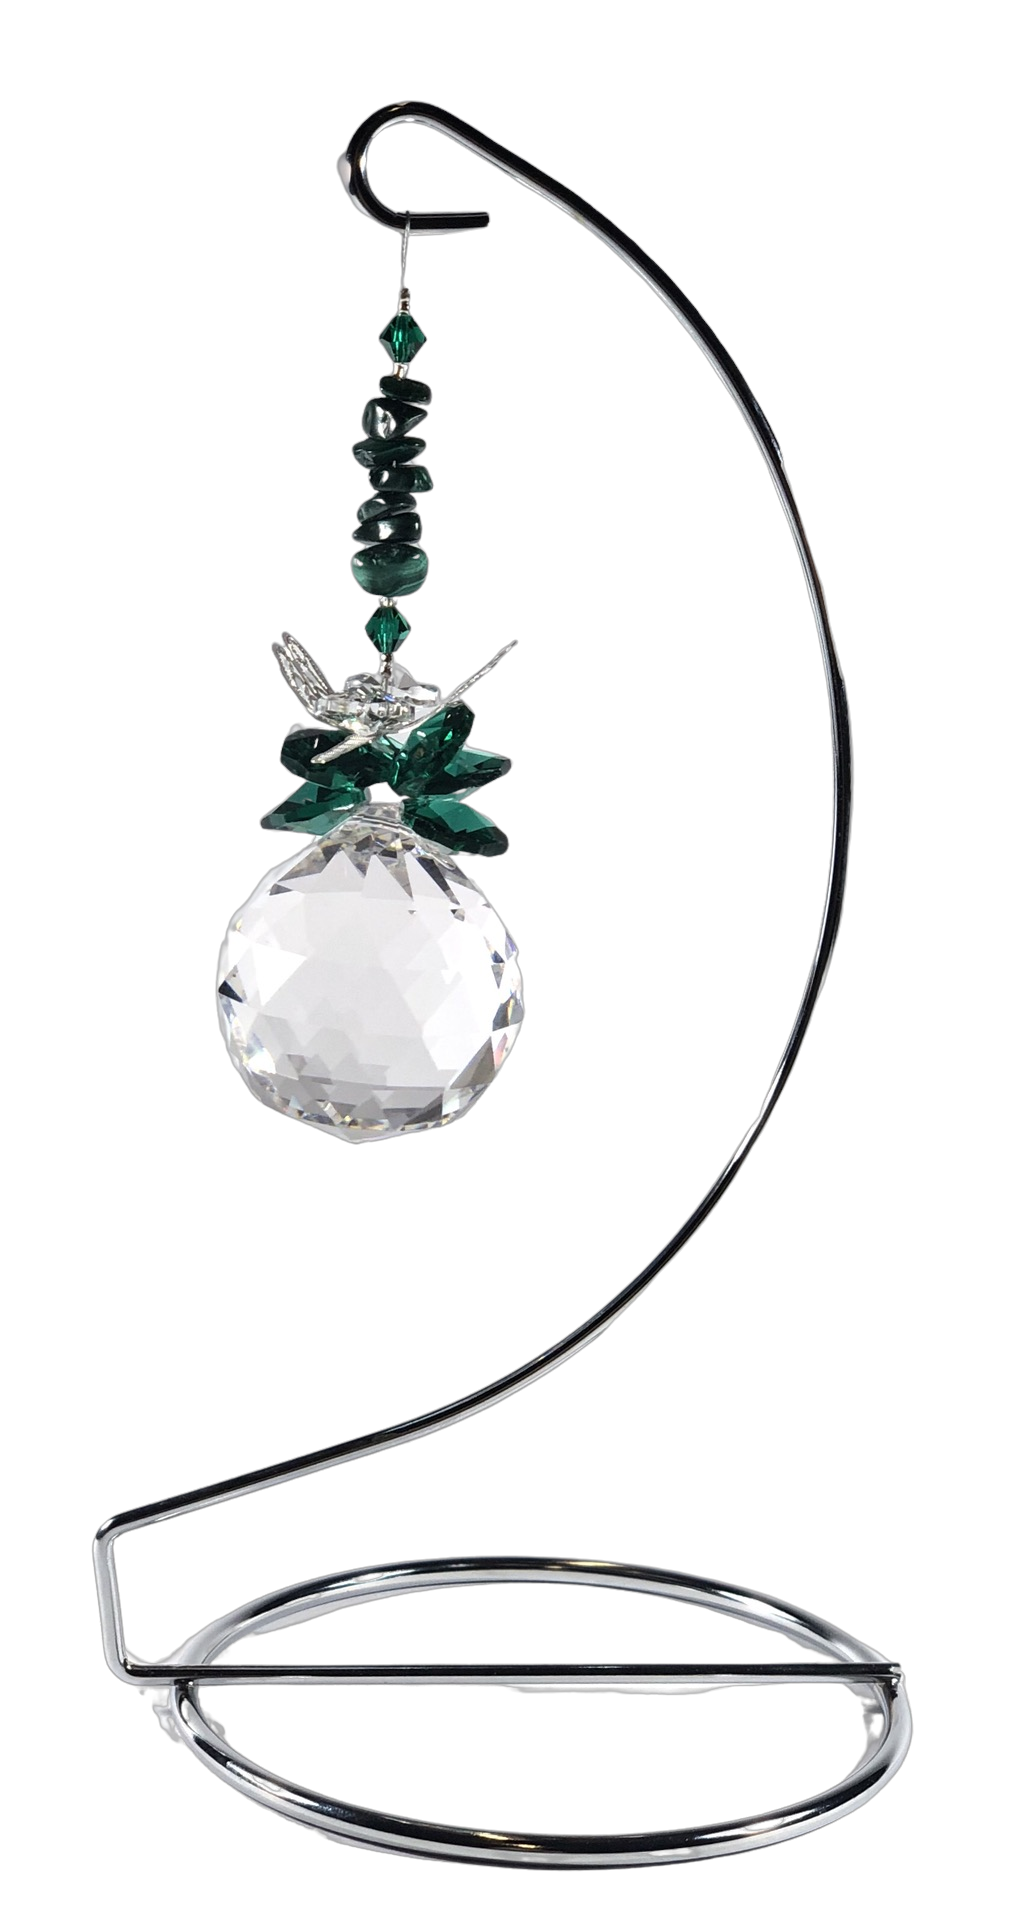 Dragonfly - green crystal suncatcher is decorated with malachite gemstones and come on this amazing large stand.